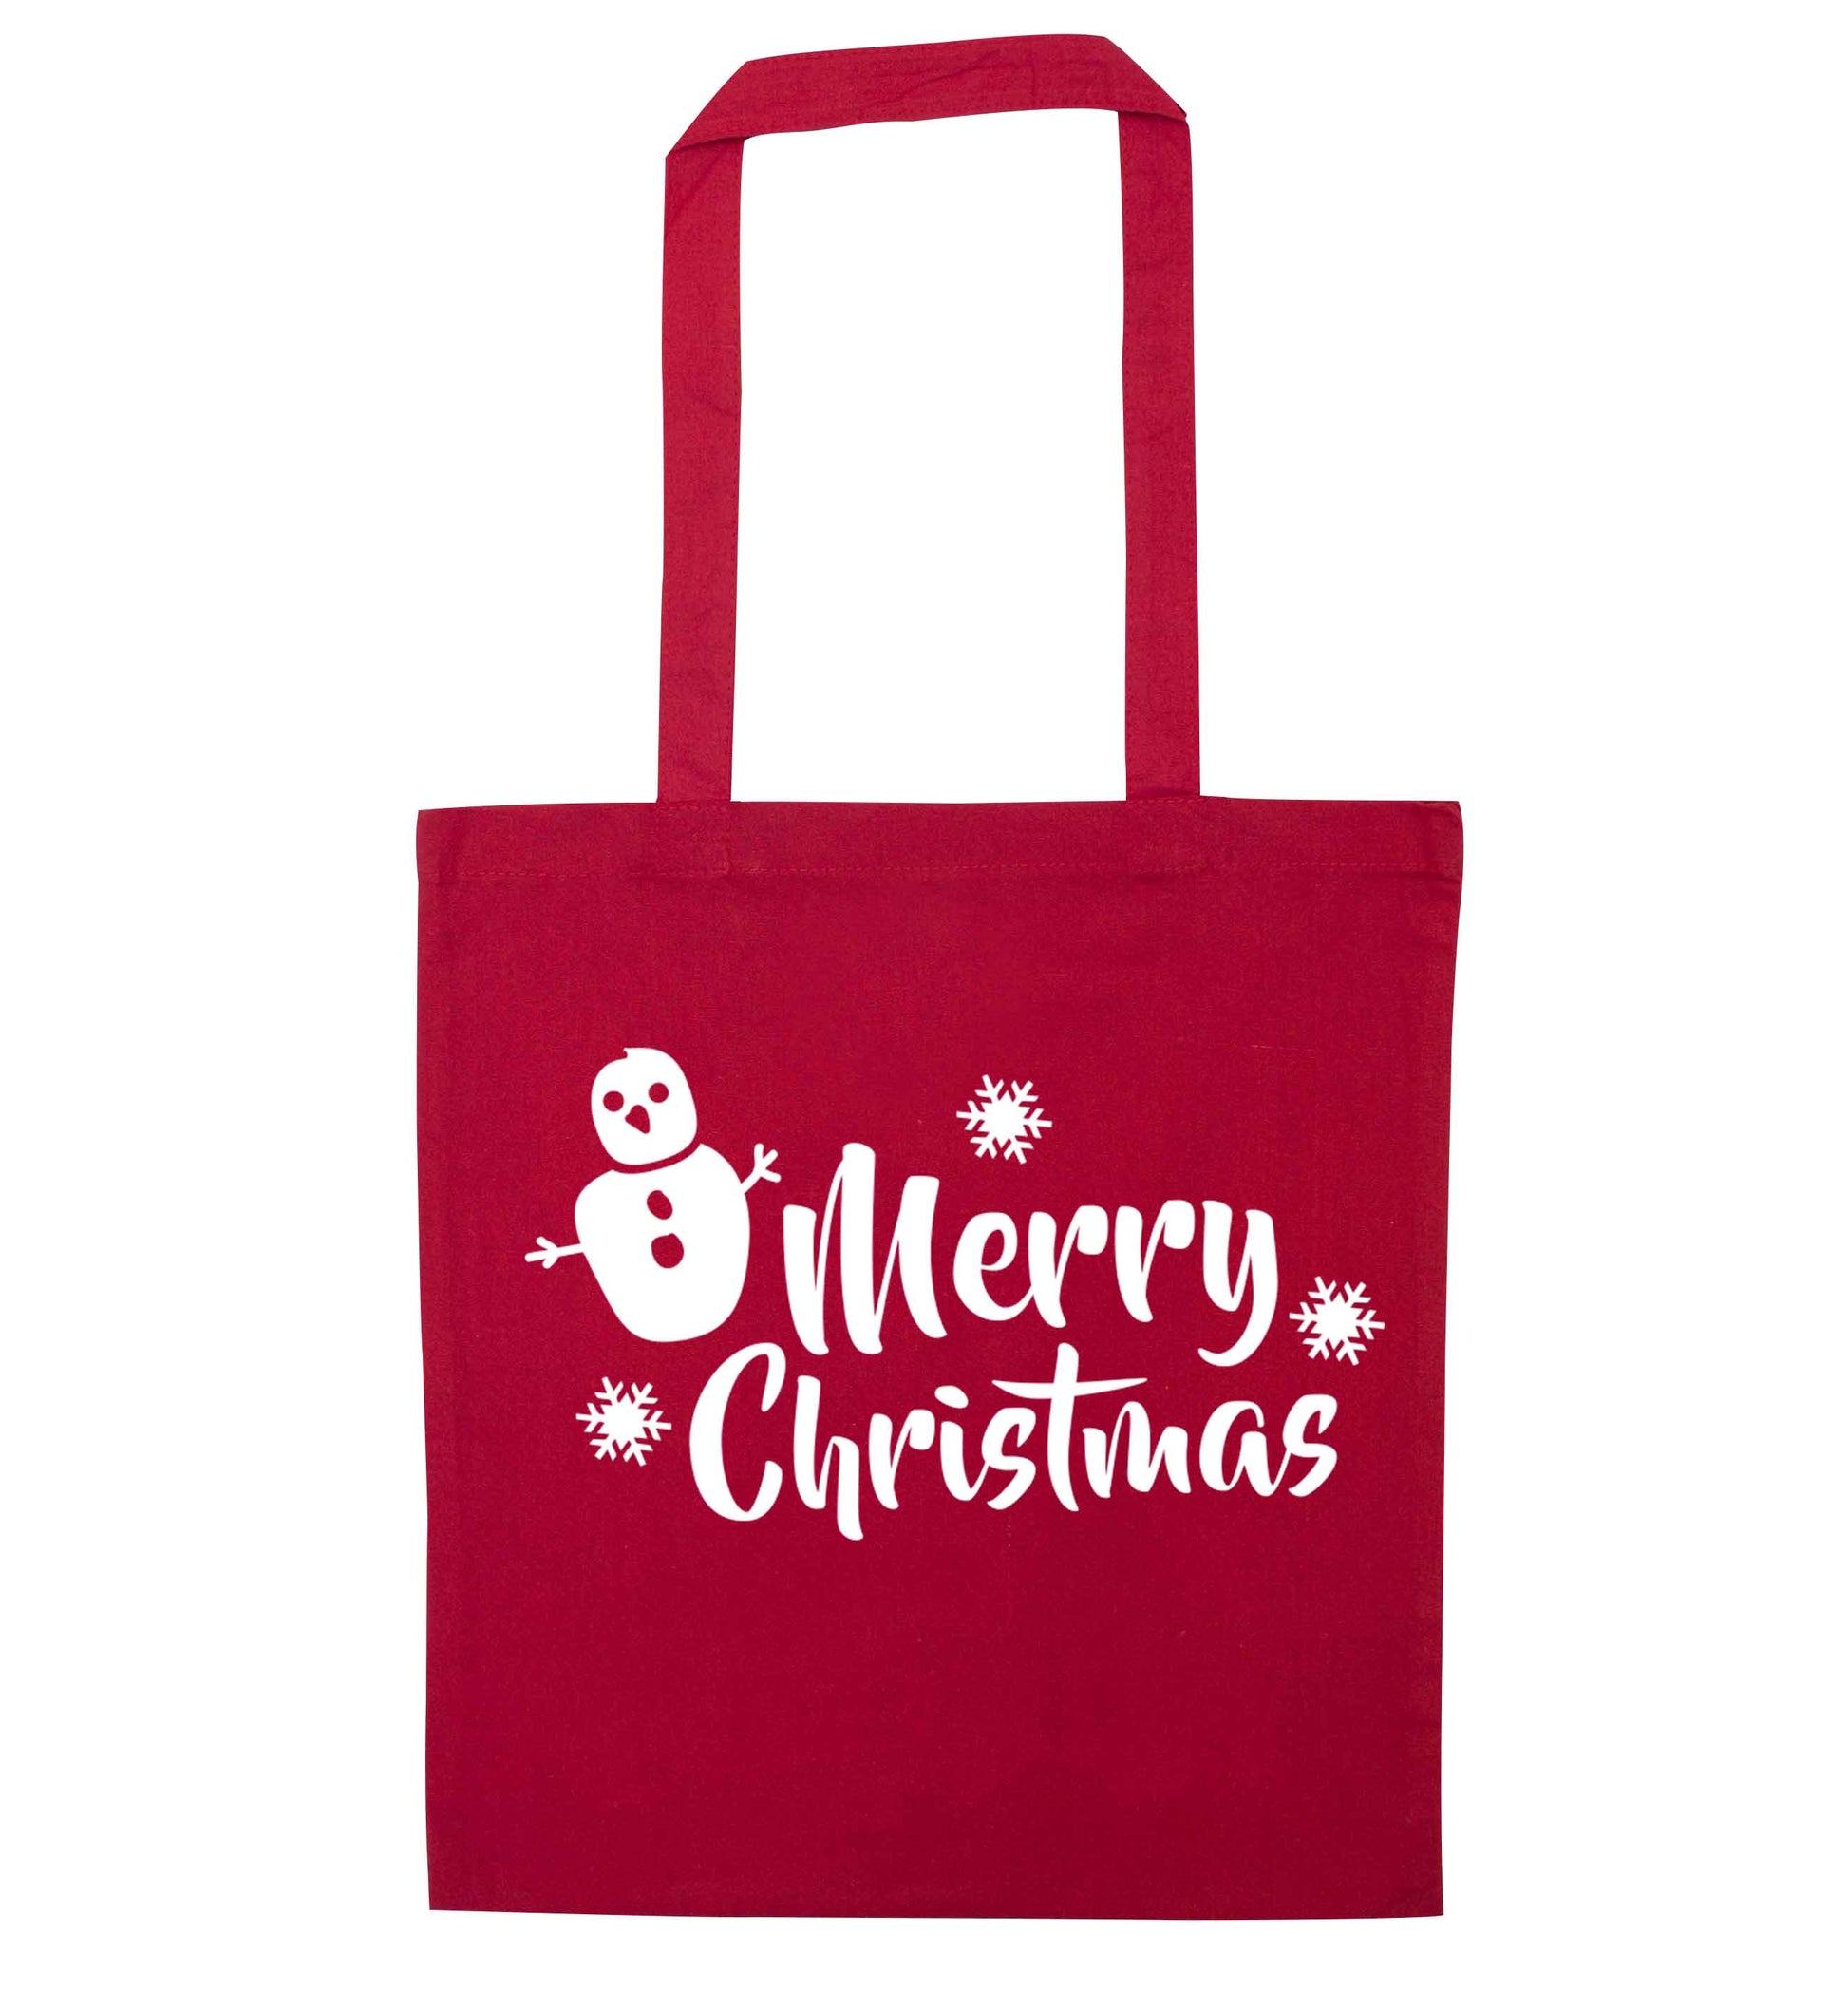 Merry Christmas - snowman red tote bag